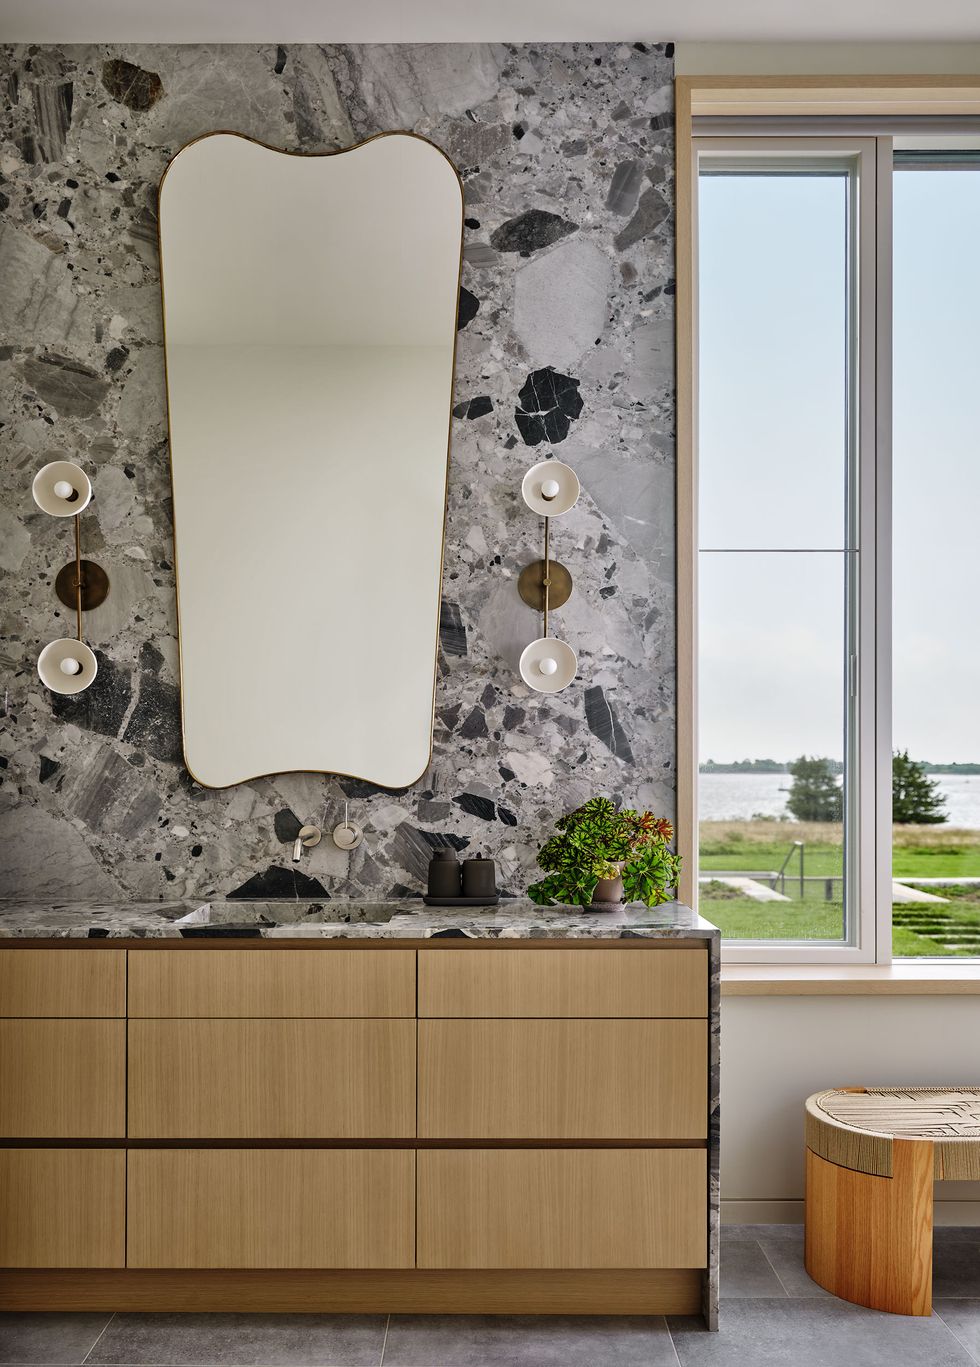 a bathroom with a marble wall with a irregular shaped mirror flanked by sconces, wood cabinets with marble top and sink, potted pant, circular two toned bench, windows looking out to lawn and the sea